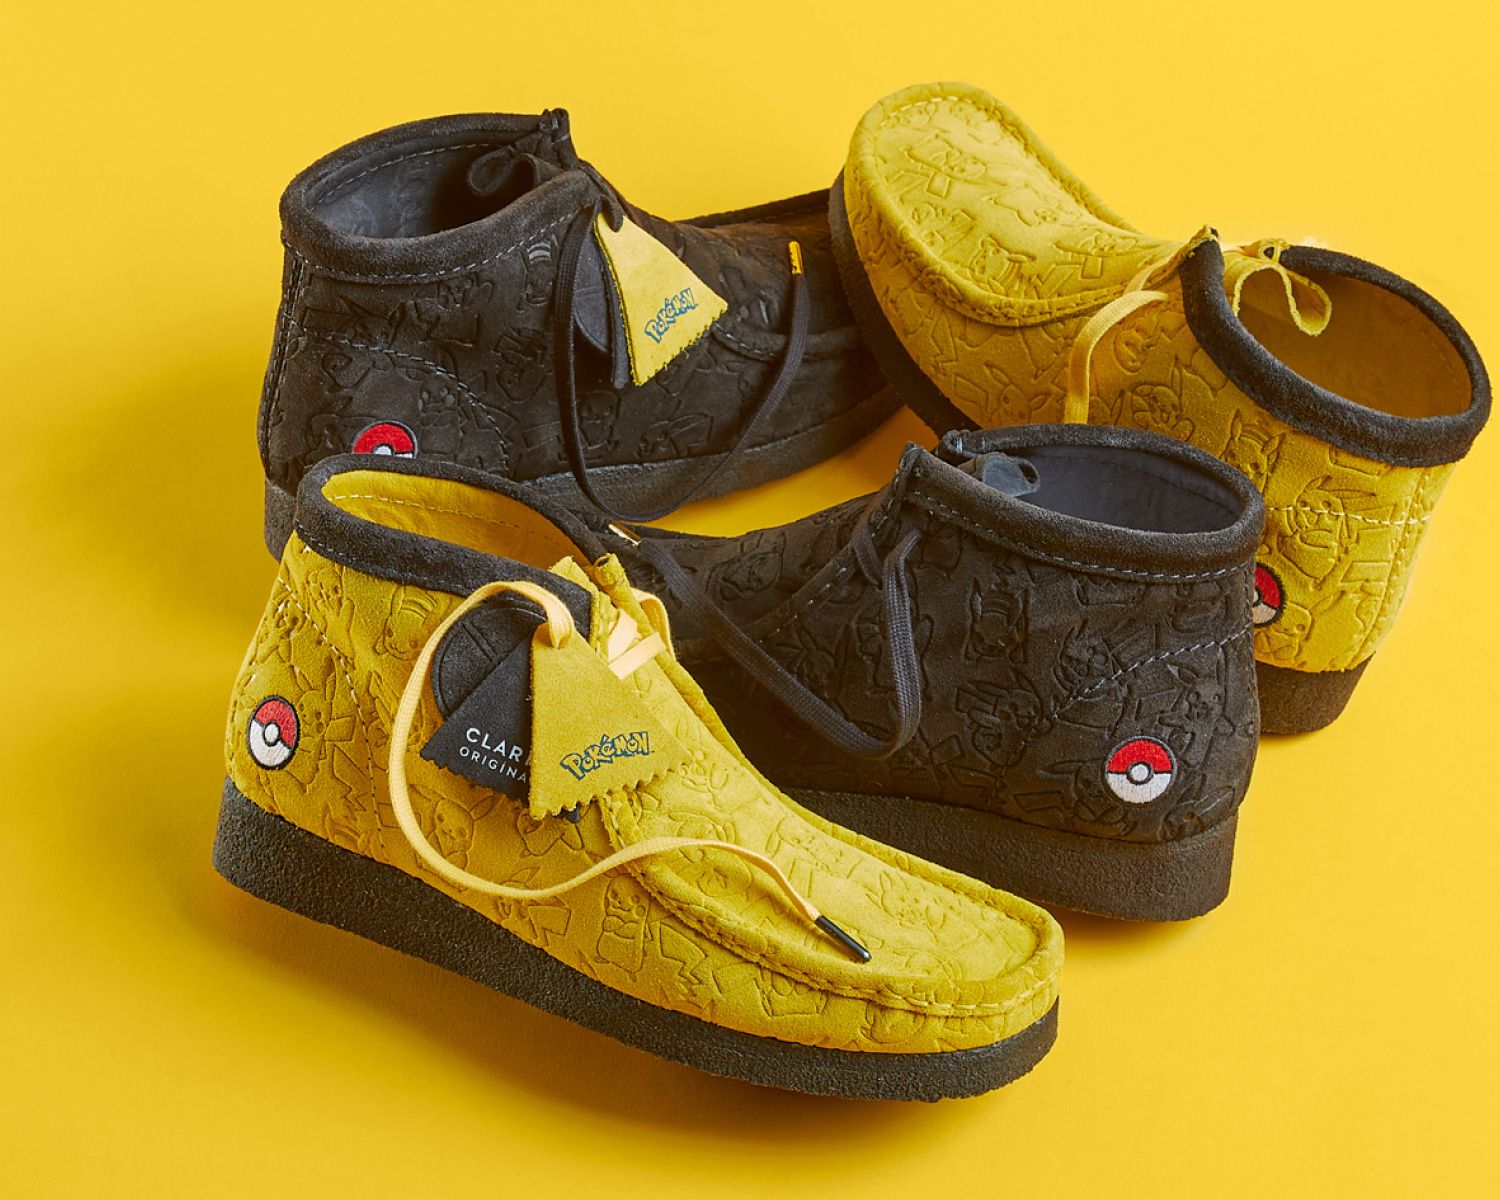 Clarks Originals Pokemon Collection - Wallabee Boots Collab |